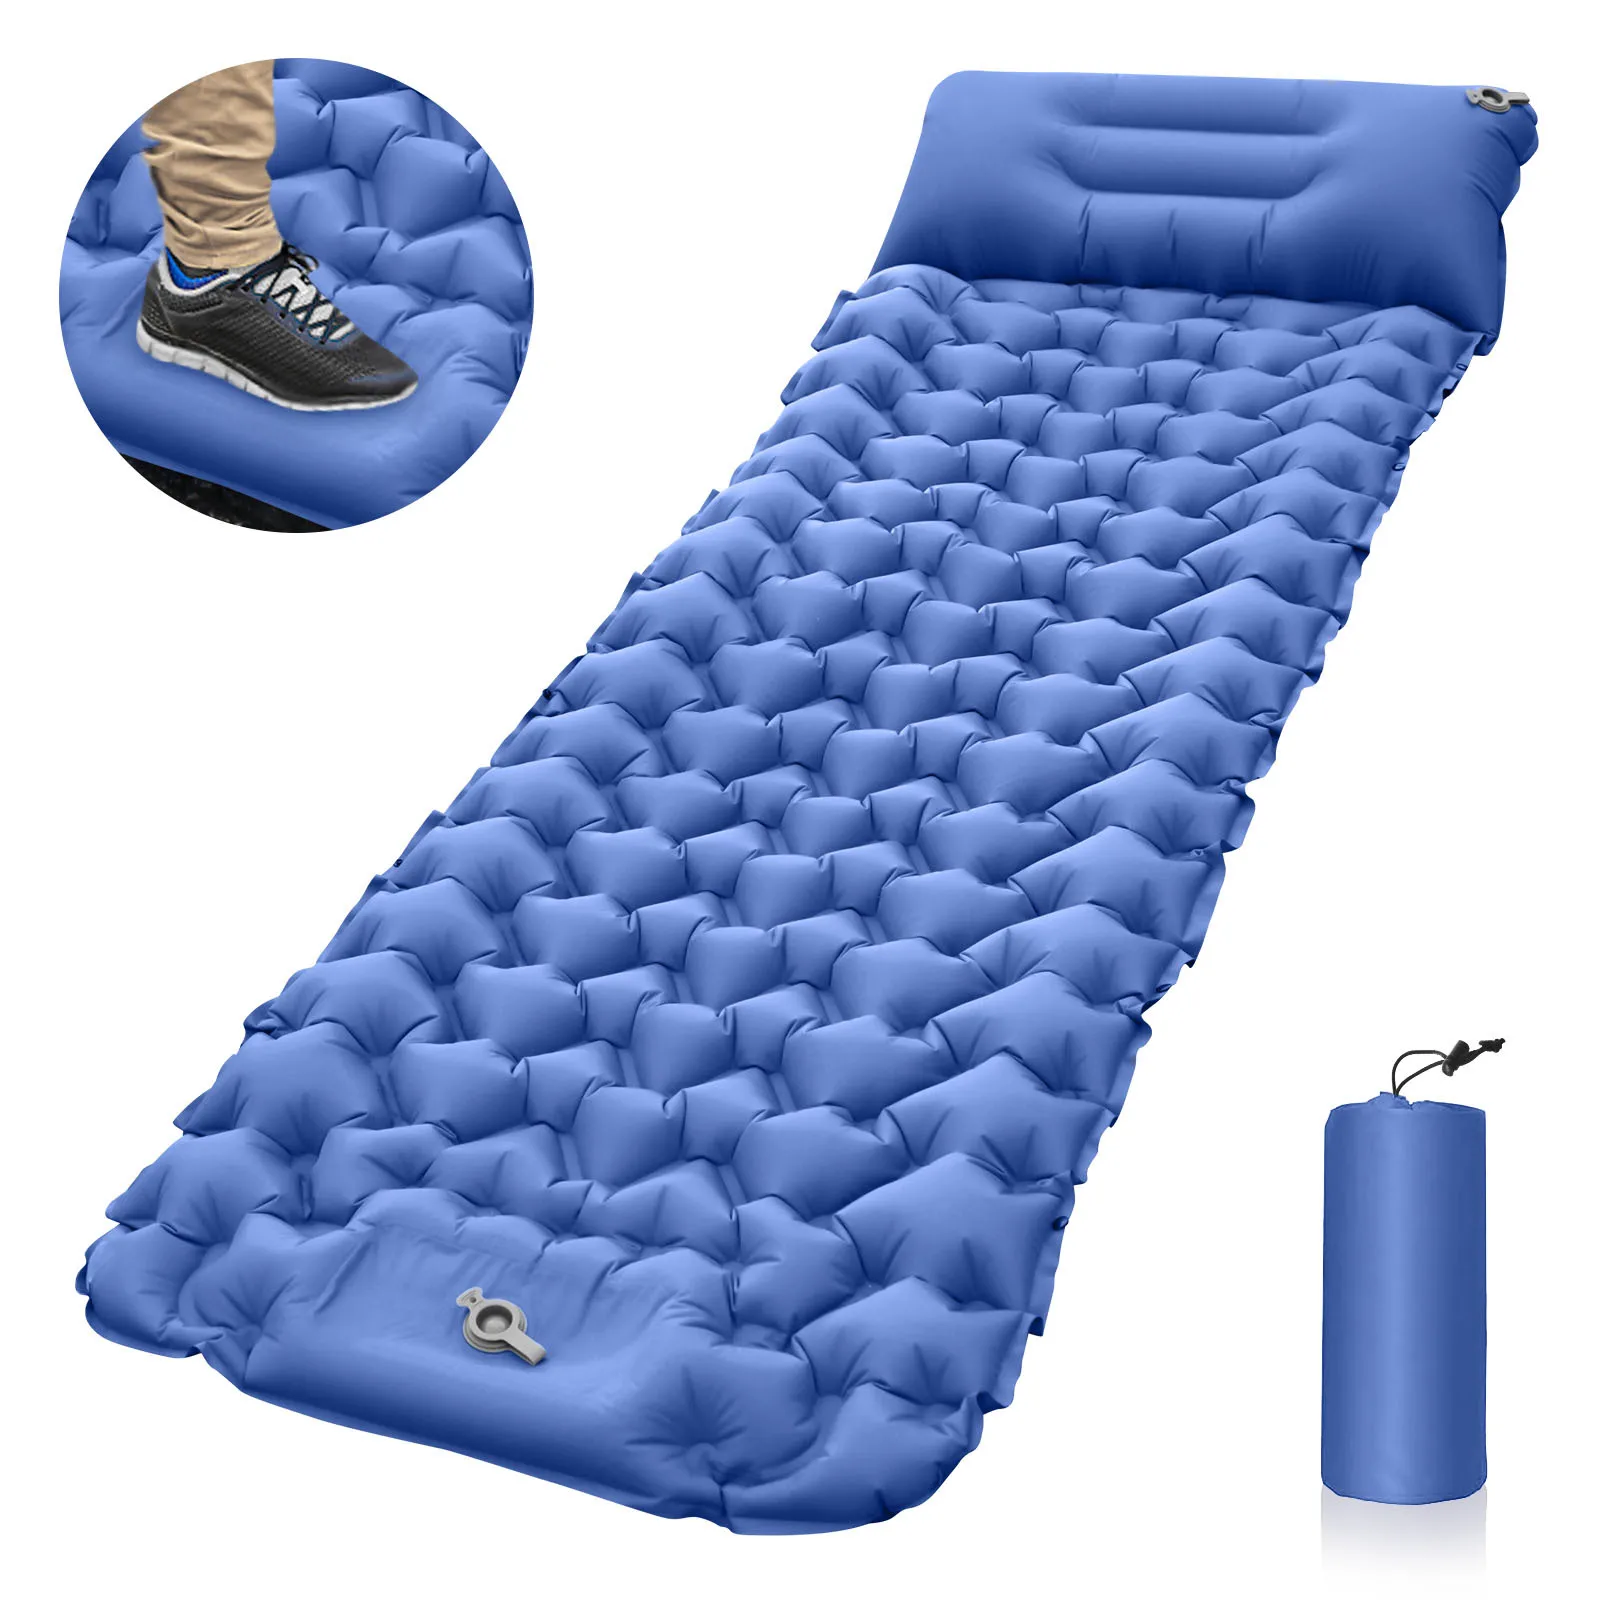 Inflatable Camping Sleeping Pad Mat With Pillow Built-in Pump Compact Ultralight Waterproof Air Mattress For Backpacking Hiking